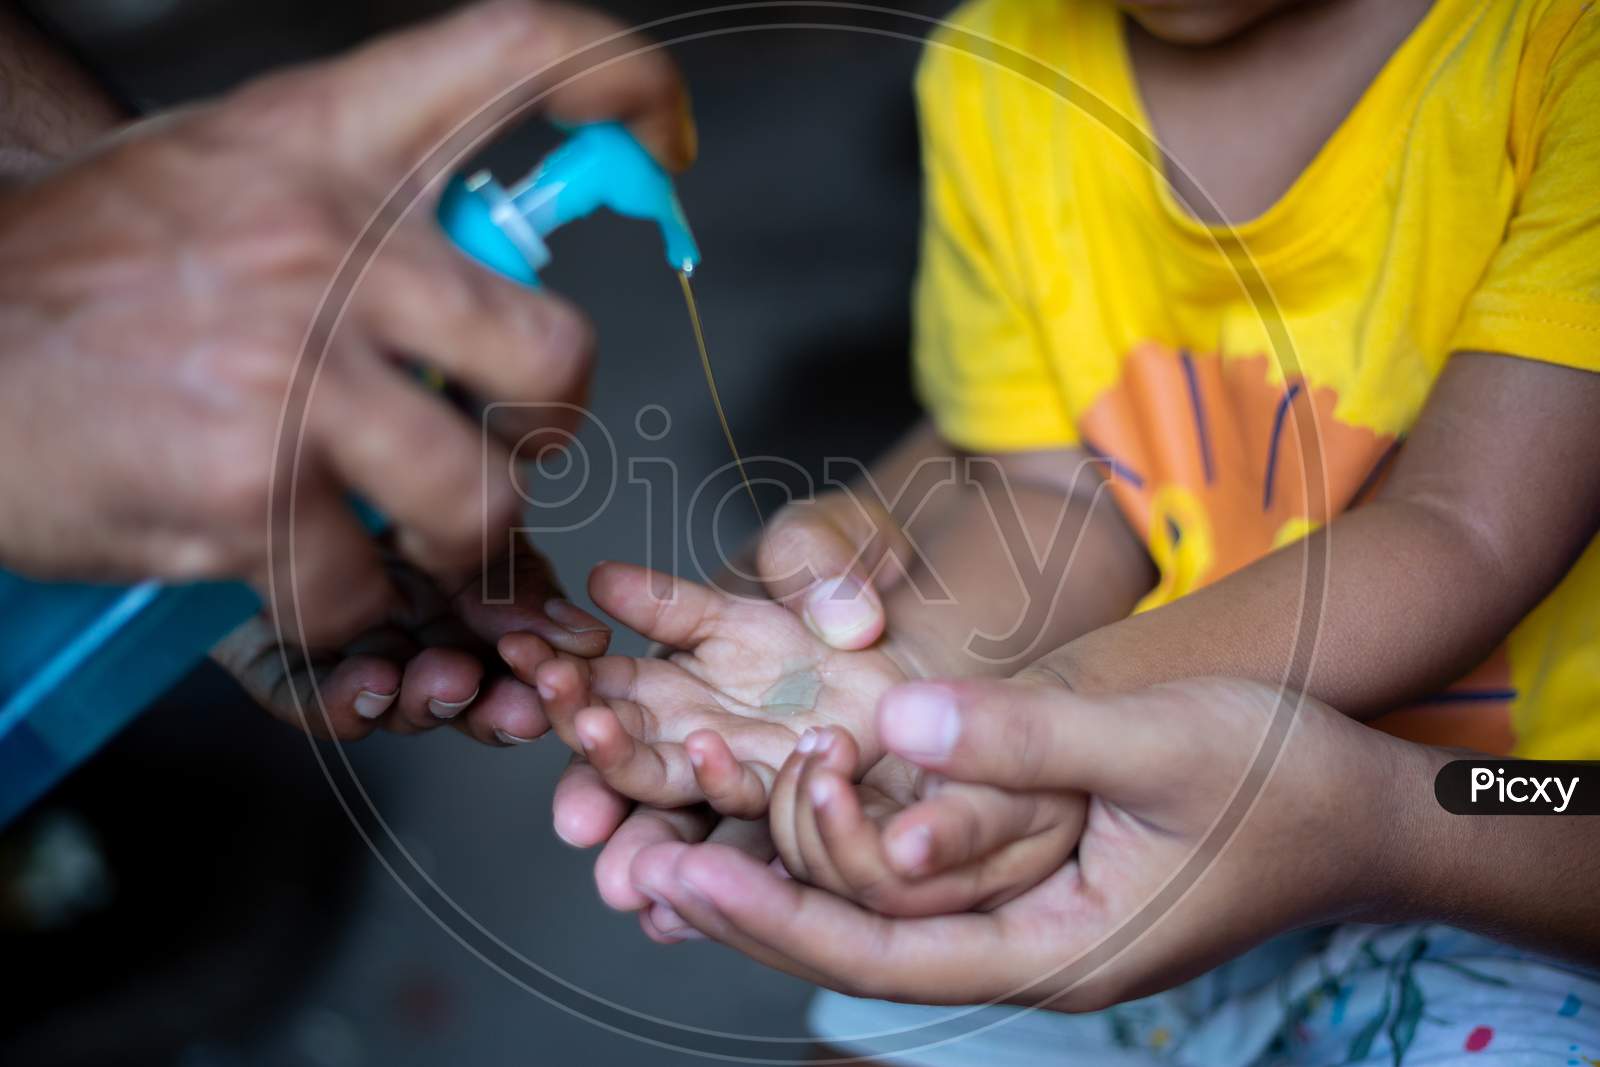 A Child Is Learning How To Clean Hands With Liquid Cleaning Gel. To Prevent Coronavirus, Rubbing Your Hands With Soap Is An Expert Way To Stop The Spread Of Coronavirus.